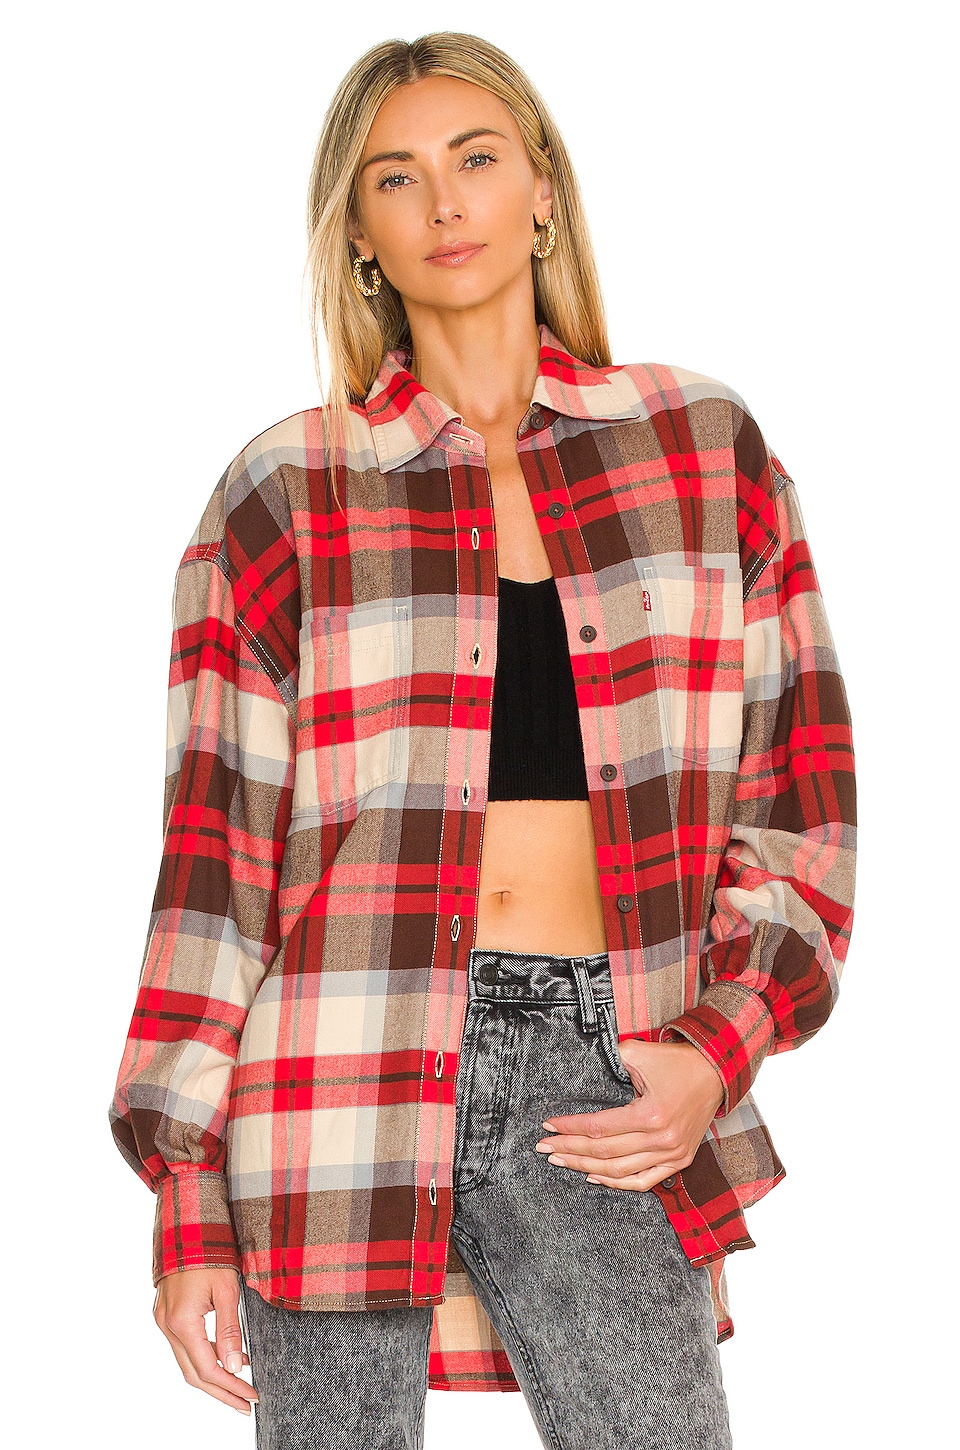 LEVI'S Remi Utility Shirt in Rosie Plaid Chicory Coffee | REVOLVE